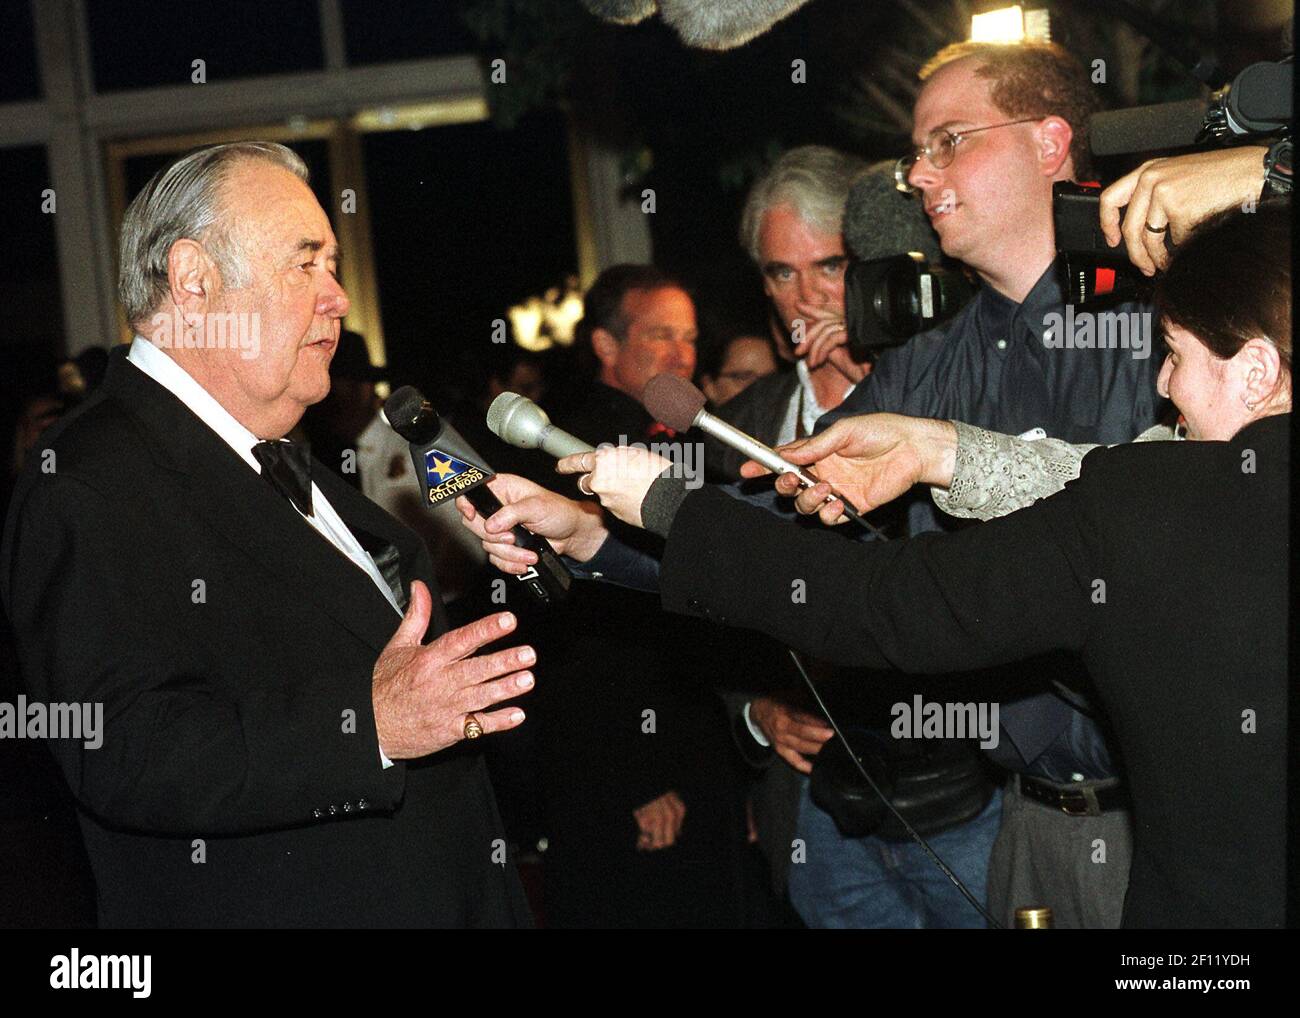 Jonathan Winters speaks to reporters as he arrives at the John F. Kennedy Center for the Performing Arts in Washington, D.C. to accept the 'Mark Twain Prize' for comedy on October 20, 1999. Winters passed away on April 11, 2013 at age 87. Photo Credit: Ron Sachs/CNP/AdMedia/Sipa USA Stock Photo